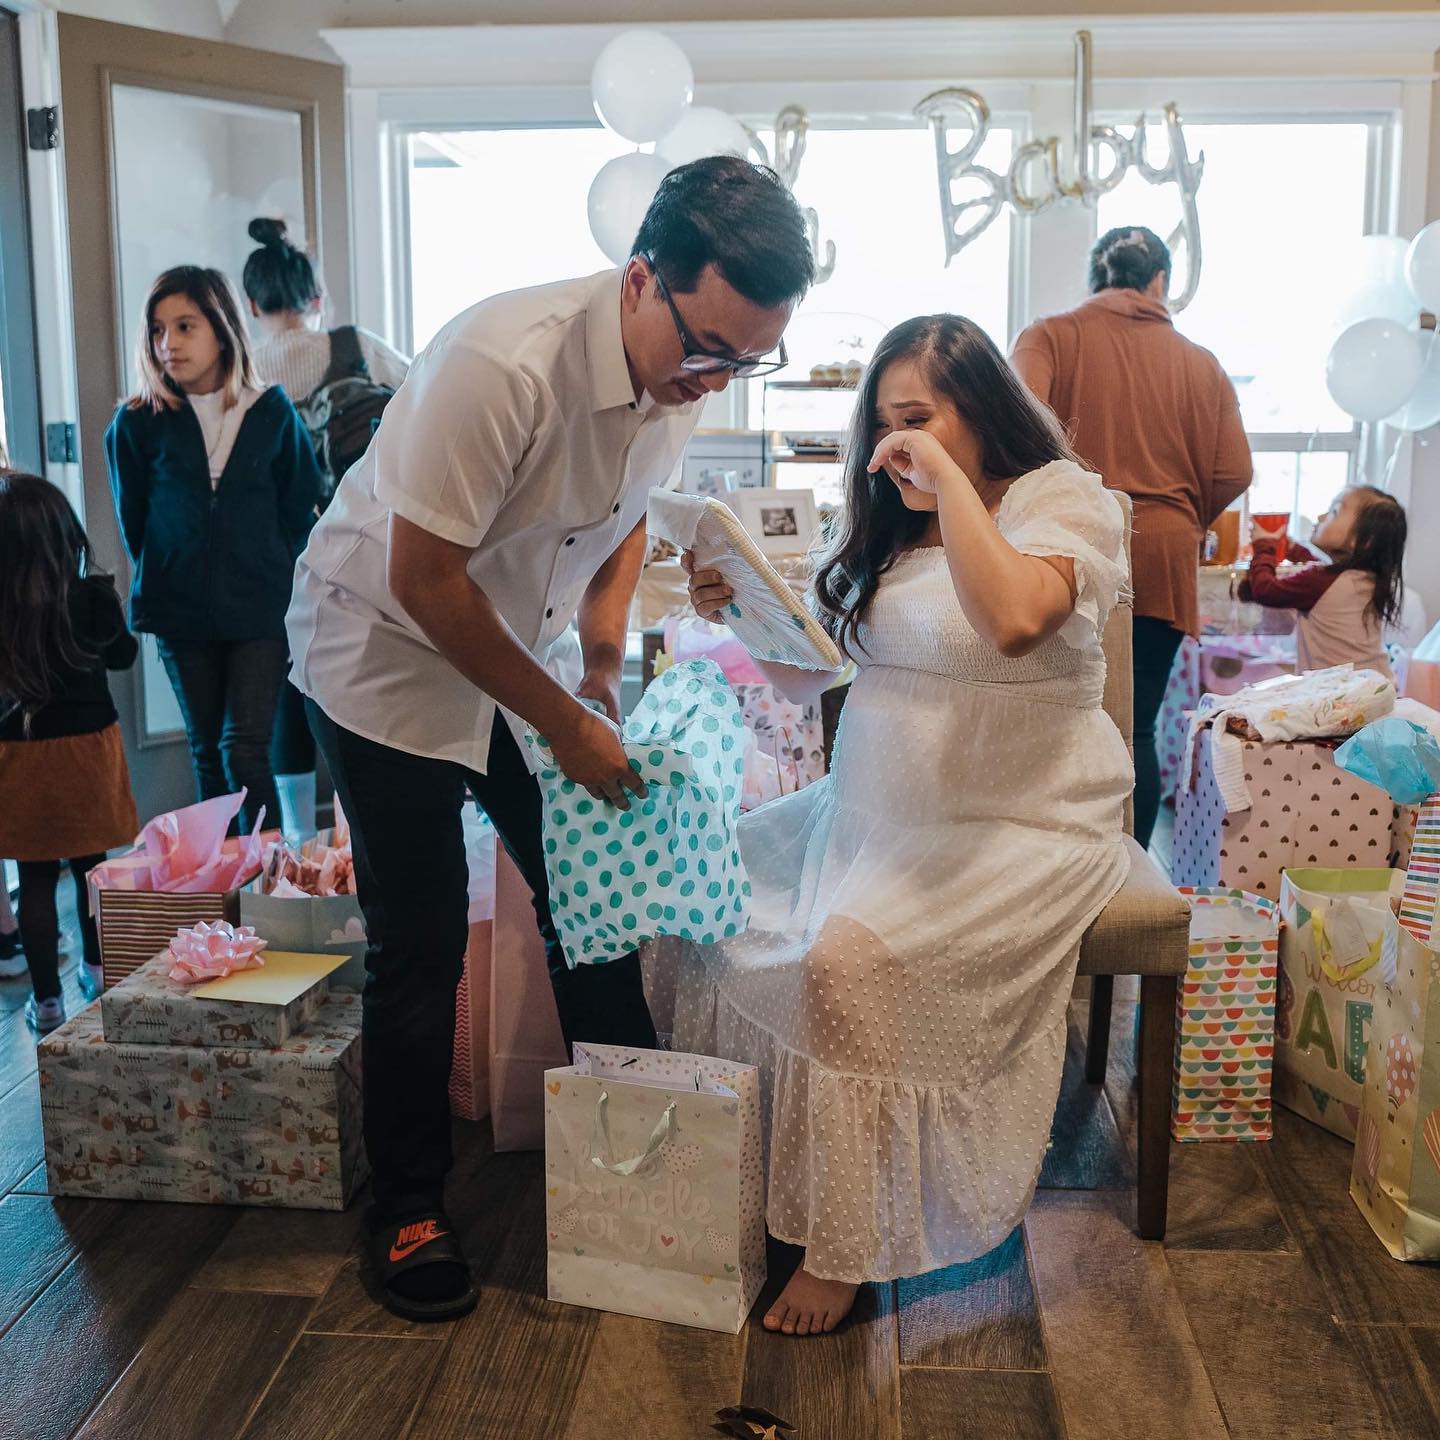 An expecting mother opens gifts. Photo by Instagram user @pangierdh.